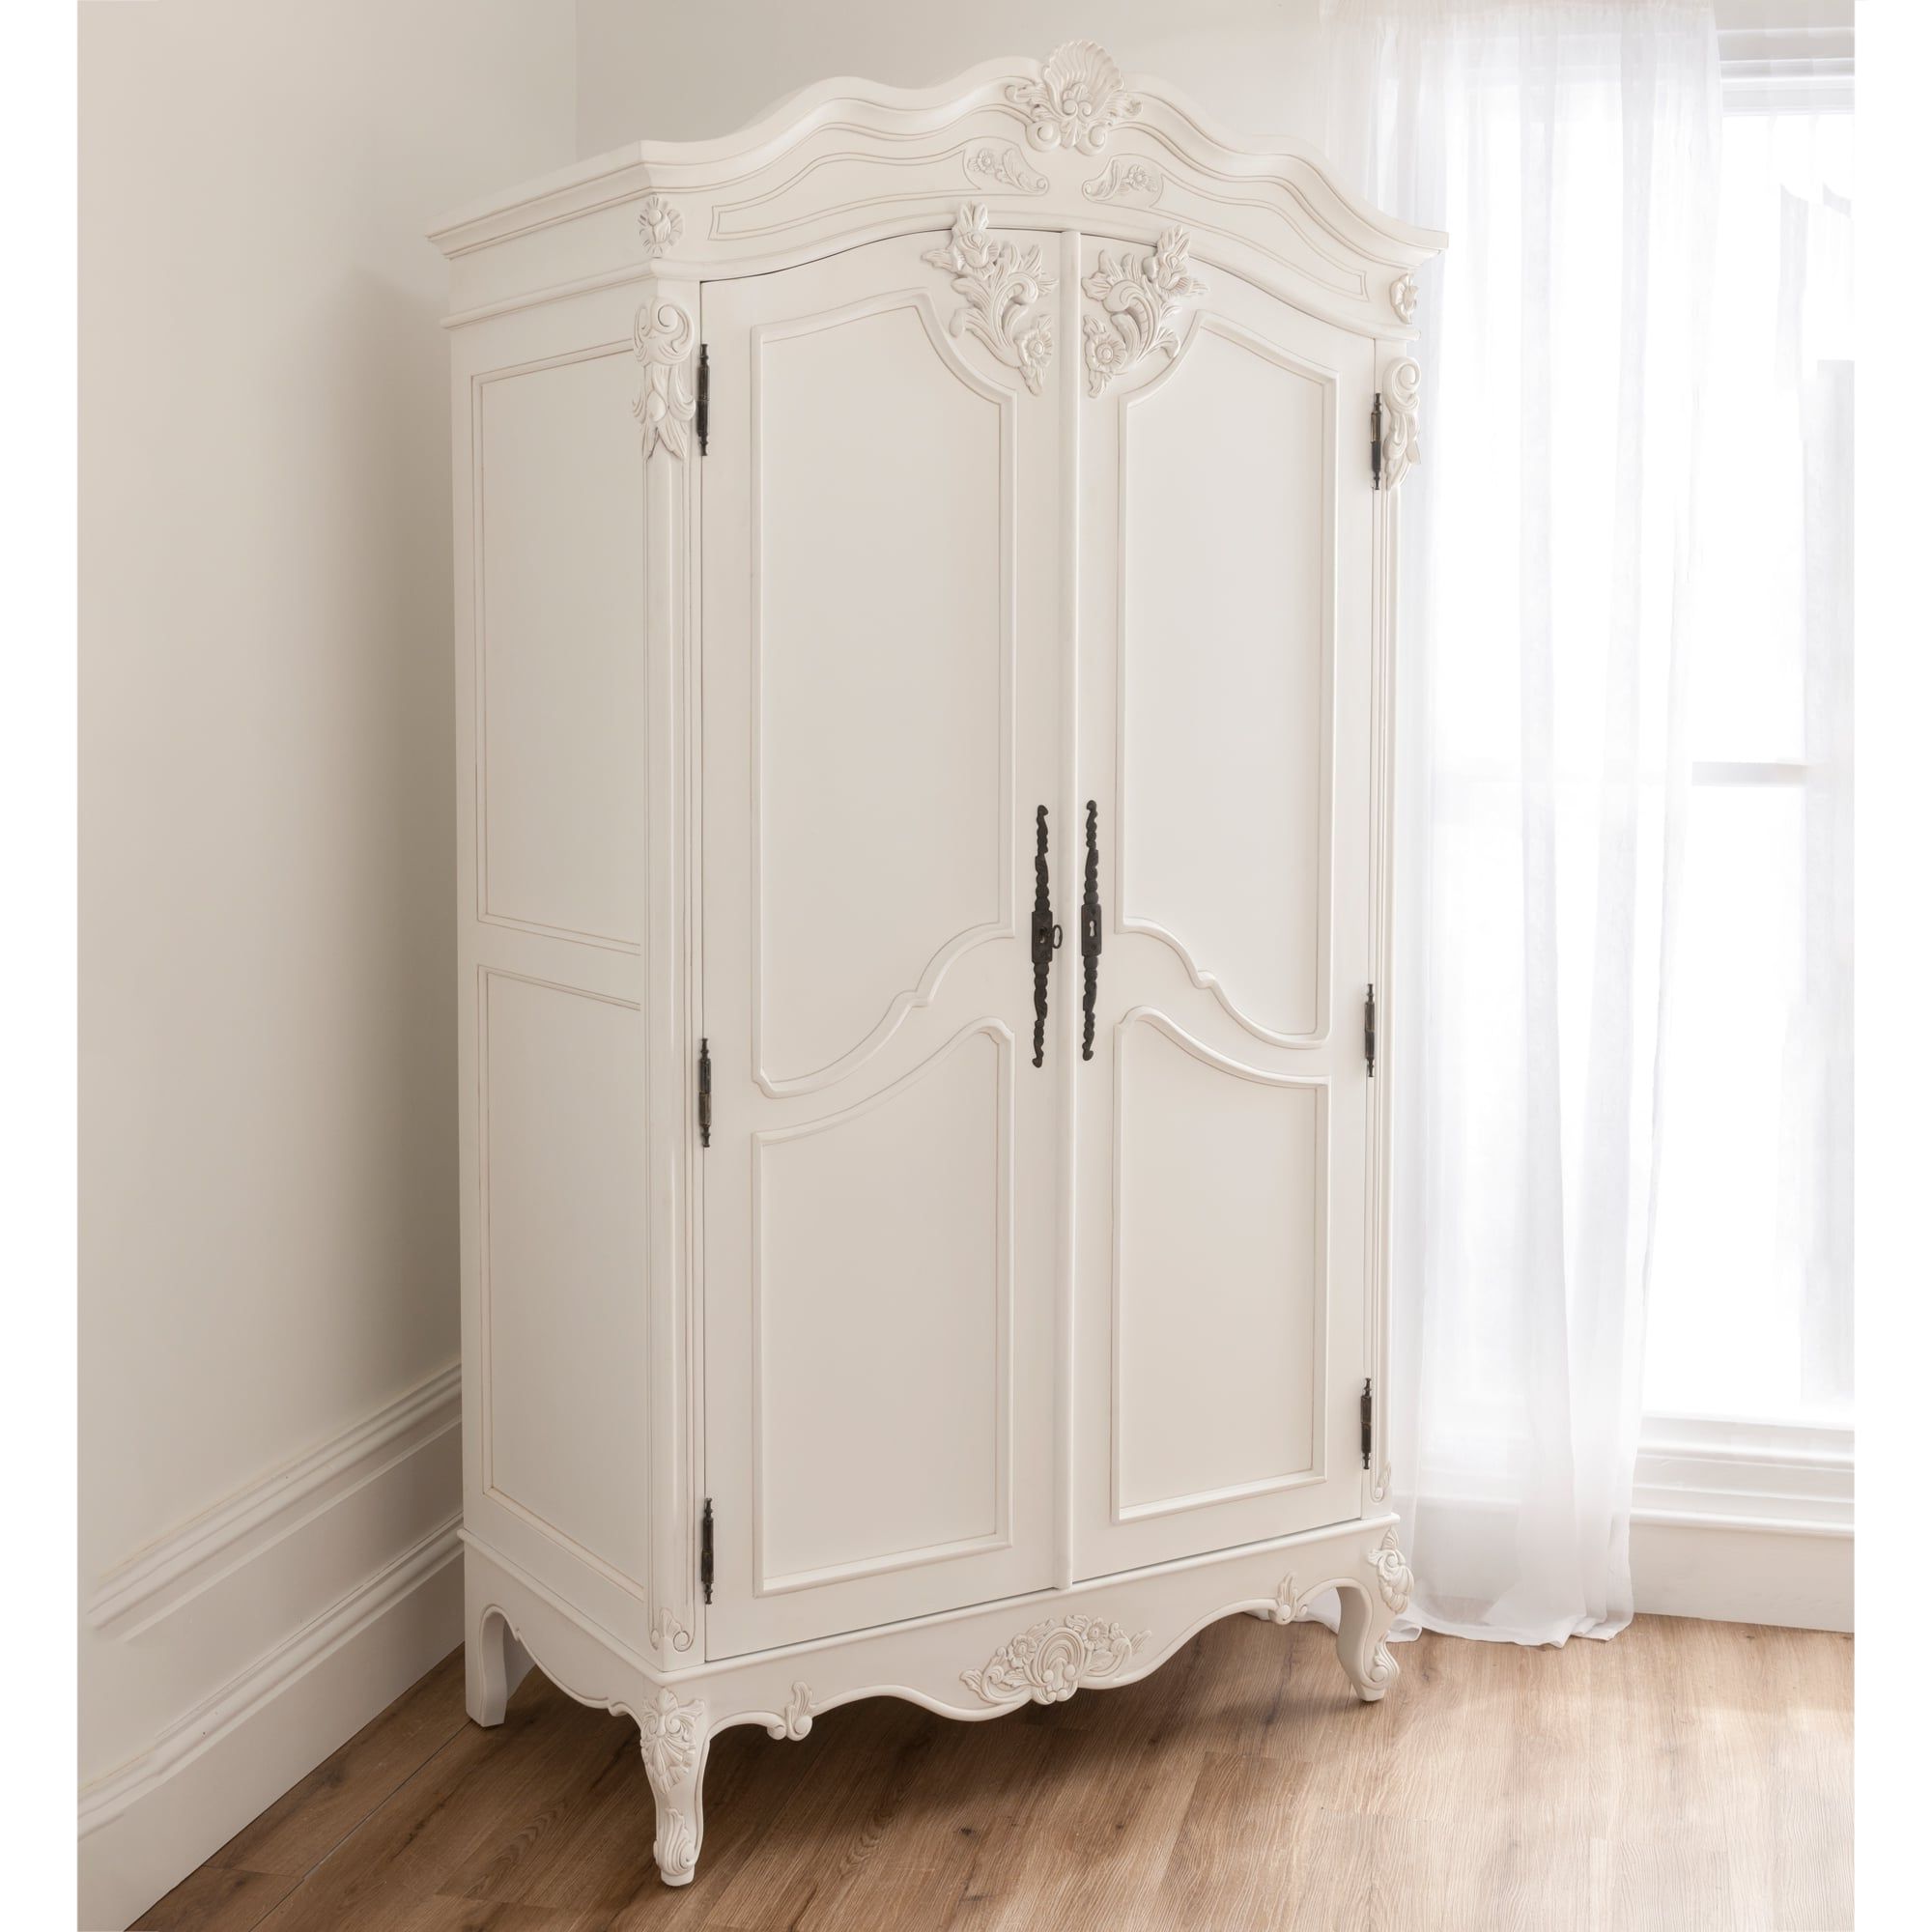 Baroque Antique French Wardrobe Is Available Online At Homesdirect365 Throughout French Armoire Wardrobes (Gallery 6 of 20)